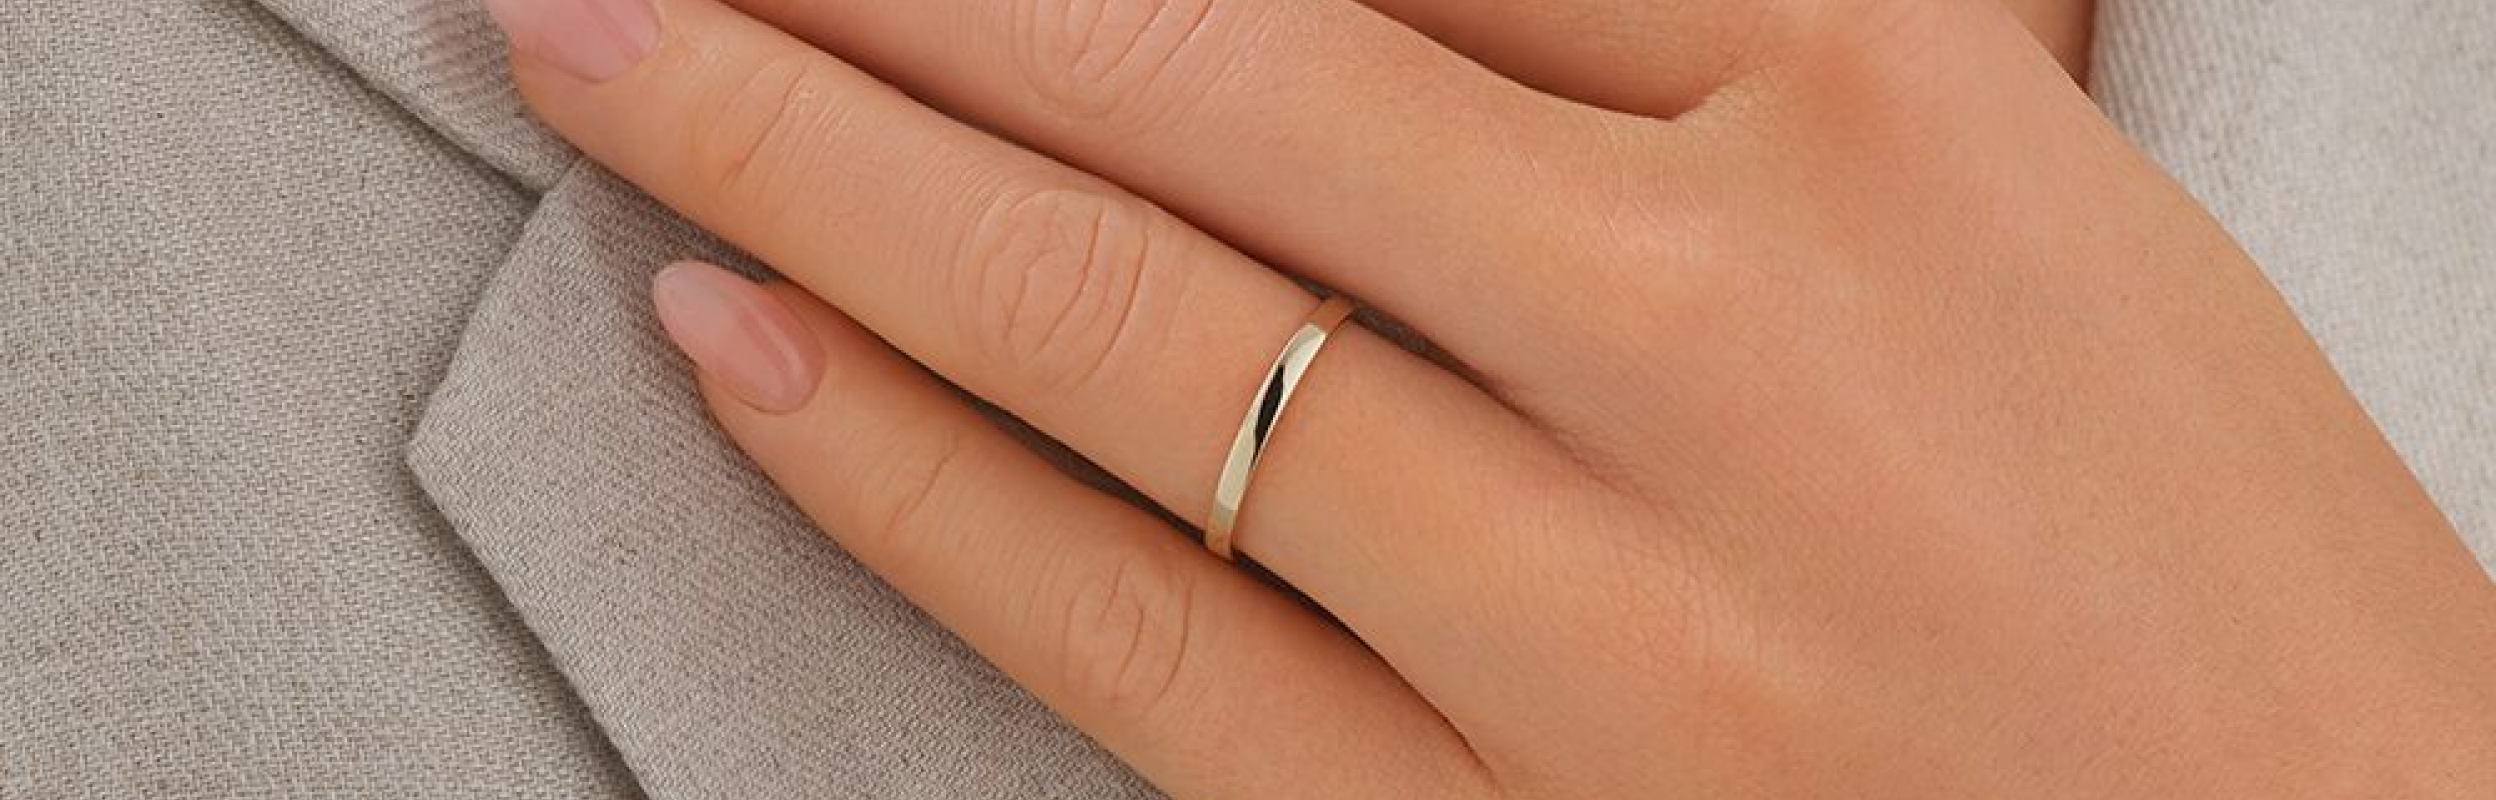 yellow gold wedding ring on womans hand